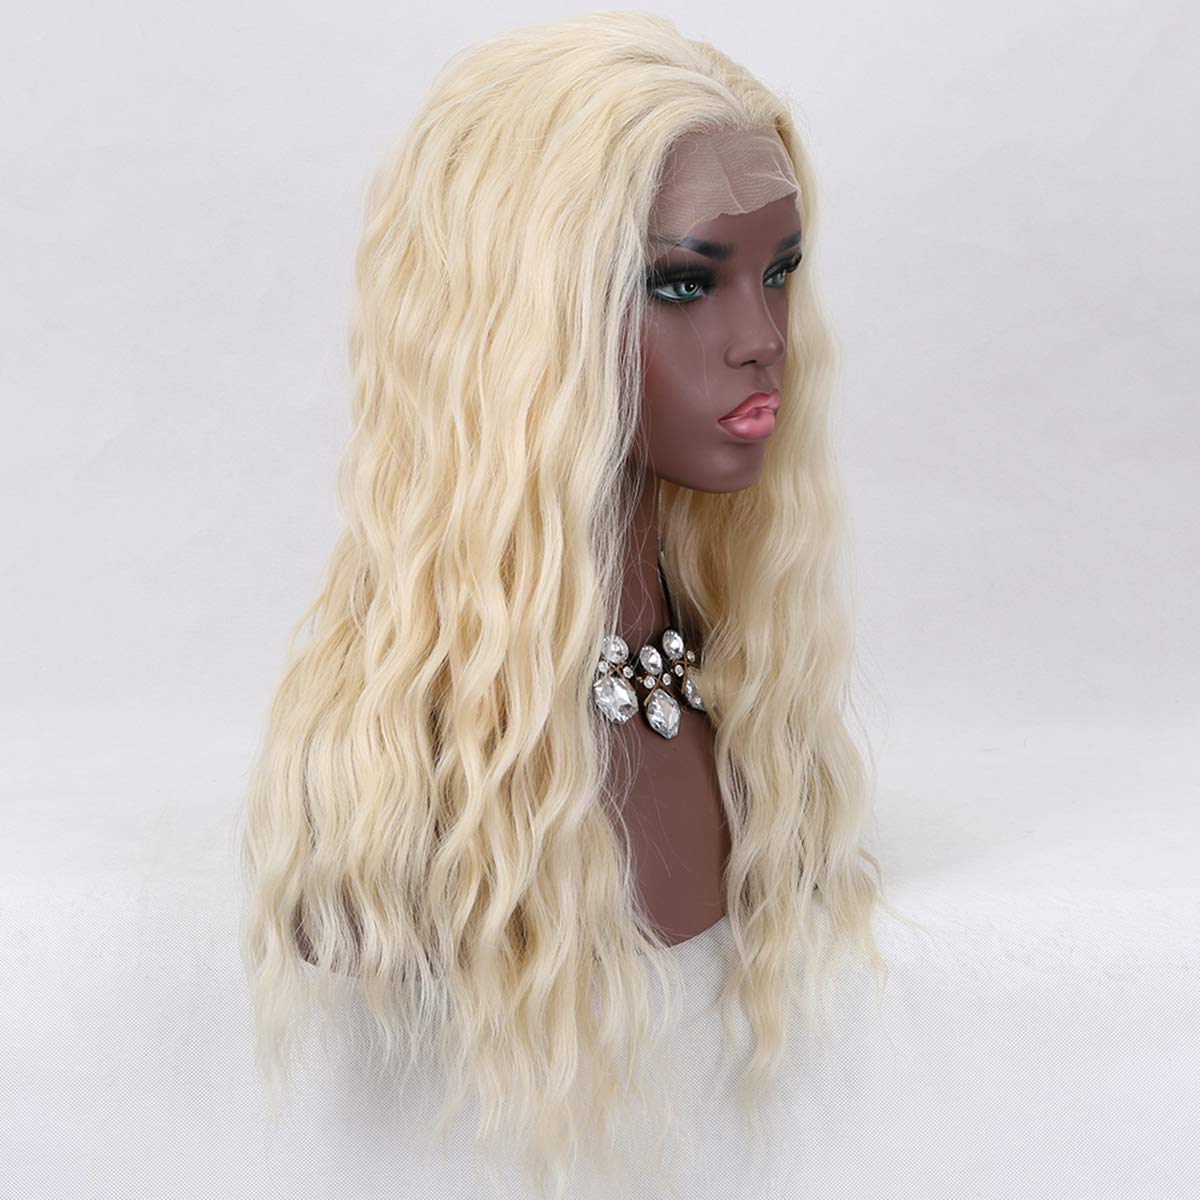 wigs costumes wig blonde wig short wig with bangs wig shop wigs human hair blonde hair color blonde hair styles blonde hair with lowlights blonde hair with brown highlights blonde hair ideas blonde hair with bangs,blonde curly hair black women,long curly hair,blonde curly hair black women,blonde curly hair,curly blonde hair,blonde hair middle part,Straight middle part lace wig,curly kinky middle part blonde hair,Lace front wig,613 Blonde color,blonde hair black girl